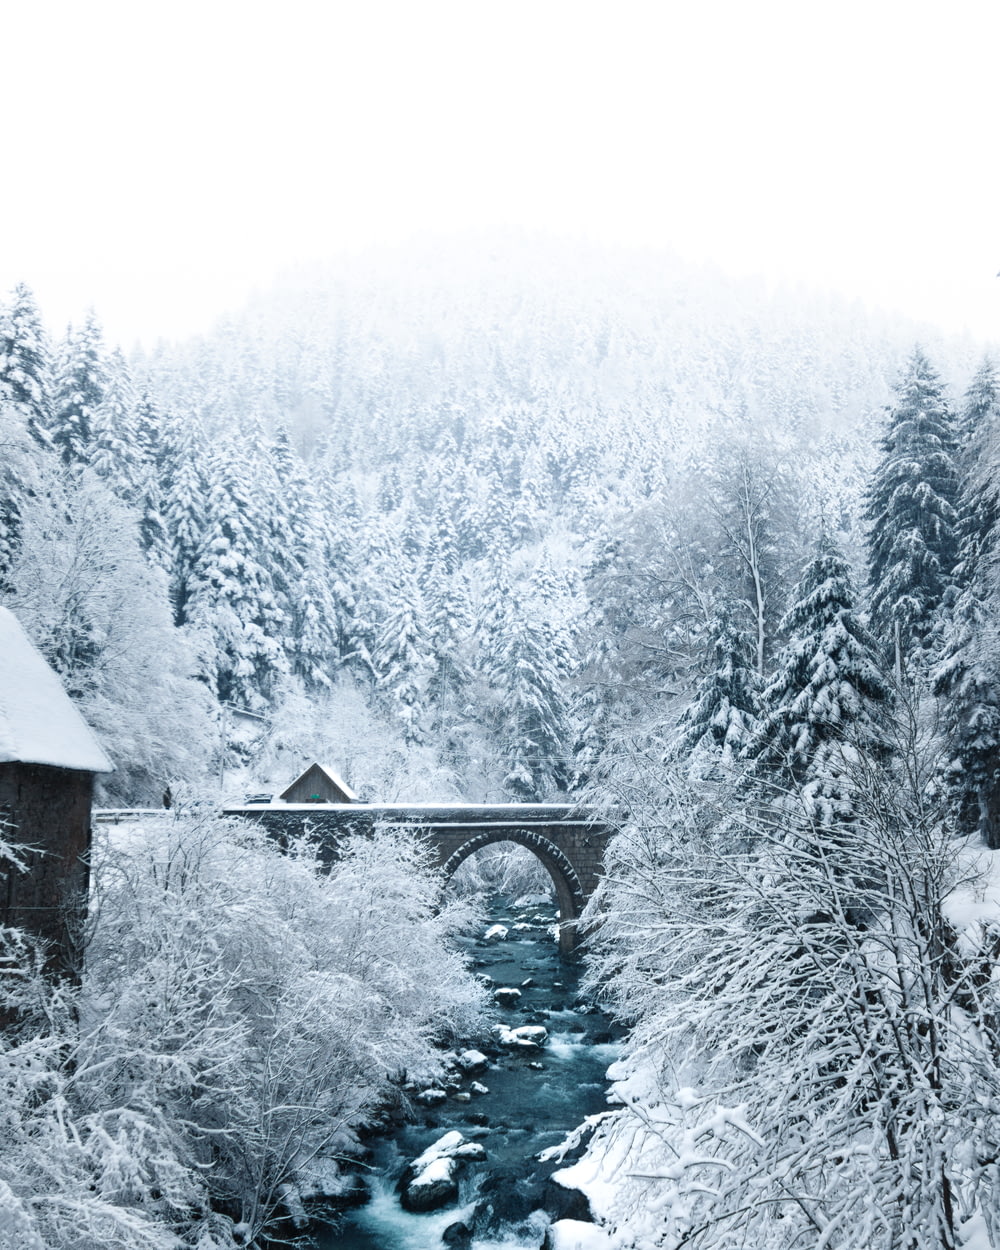 a bridge over a river surrounded by snow covered trees